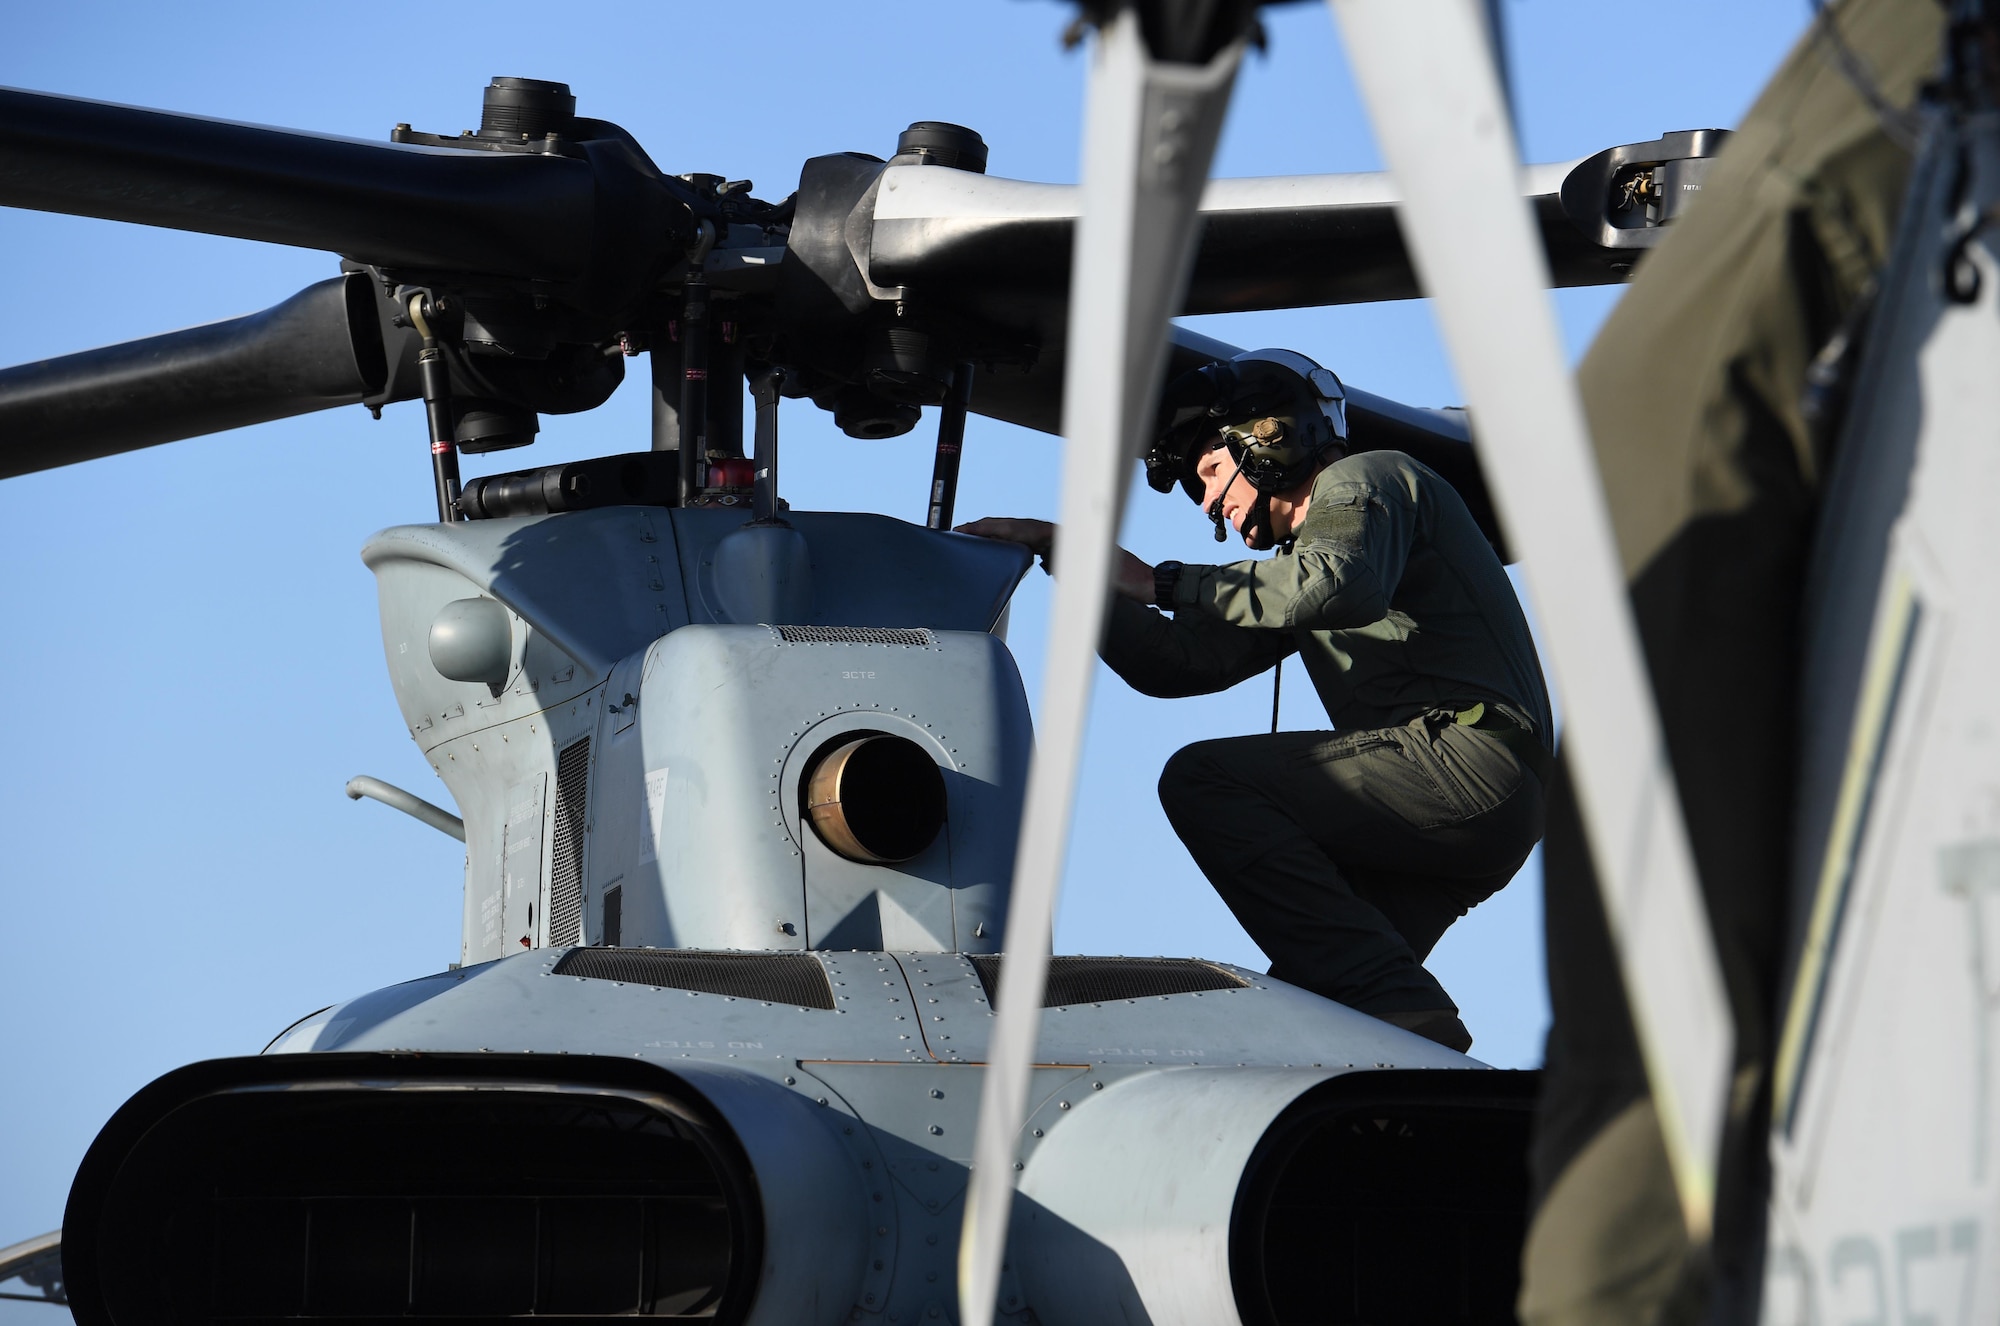 U.S. Marine Corps Capt. Edward Ross, Marine Light Attack Helicopter Squadron 167 AH-1Z Cobra pilot, Marine Corps Air Station New River, North Carolina, conducts a pre-flight inspection on an AH-1Z Cobra at Keesler Air Force Base, Mississippi, Oct. 21, 2020. Two AH-1Z Cobras and two UH-1Y Hueys were at Keesler for joint training with the Marine Special Operations Command during their RAVEN exercise from Oct. 12-21. RAVEN is the exercise Marine Raiders complete after their six-month training cycle in preparation for deployment to ensure operational readiness of the Marine Special Operations Teams. (U.S. Air Force photo by Kemberly Groue)